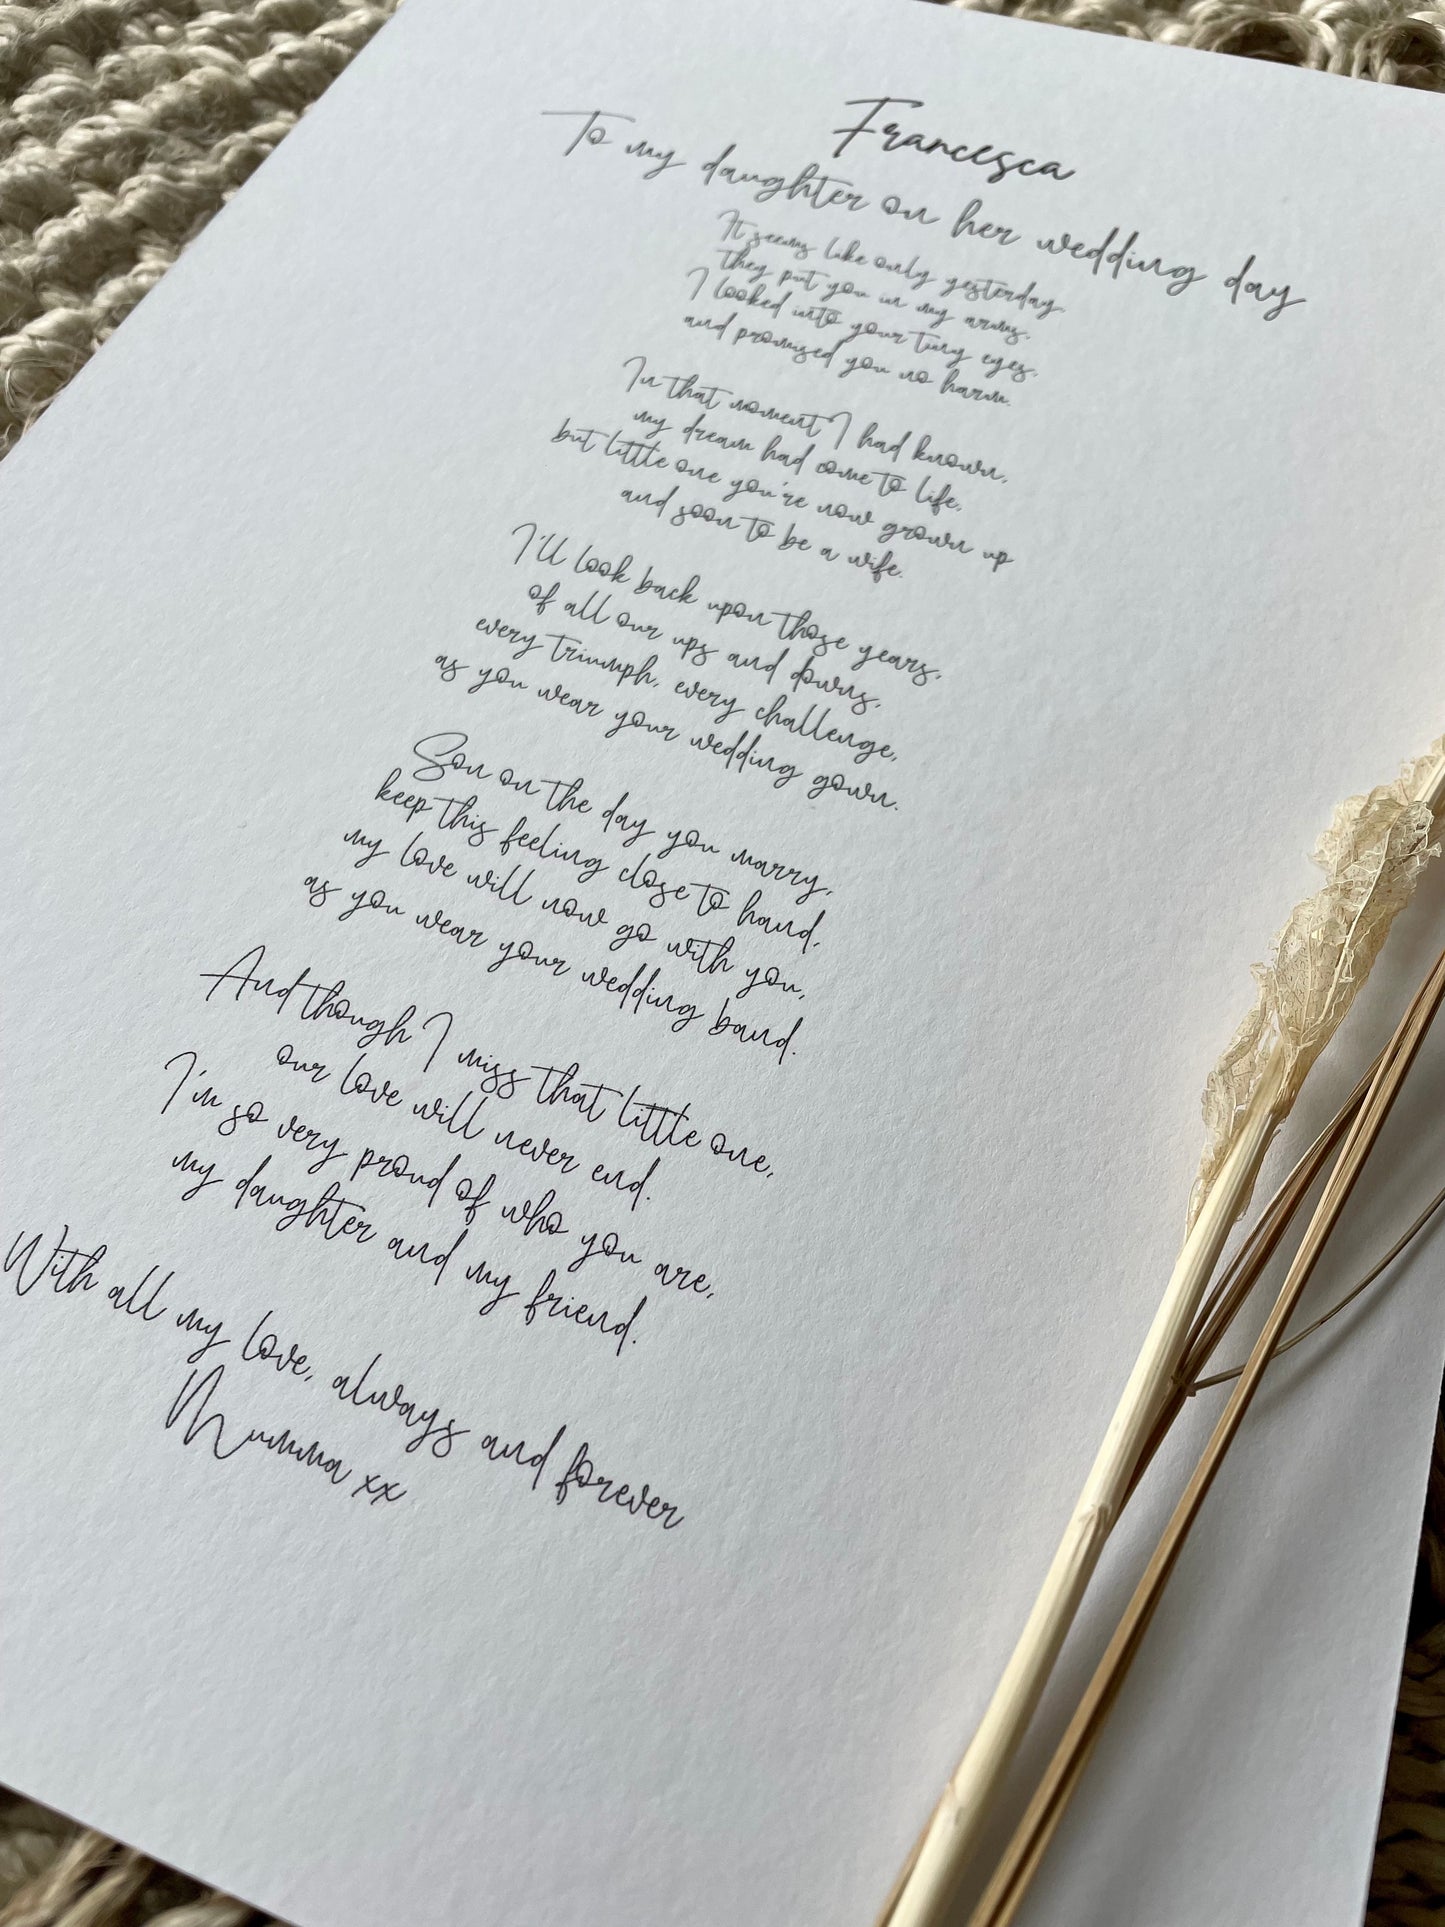 Personalised Bride To Be Poem From Mother Of The Bride